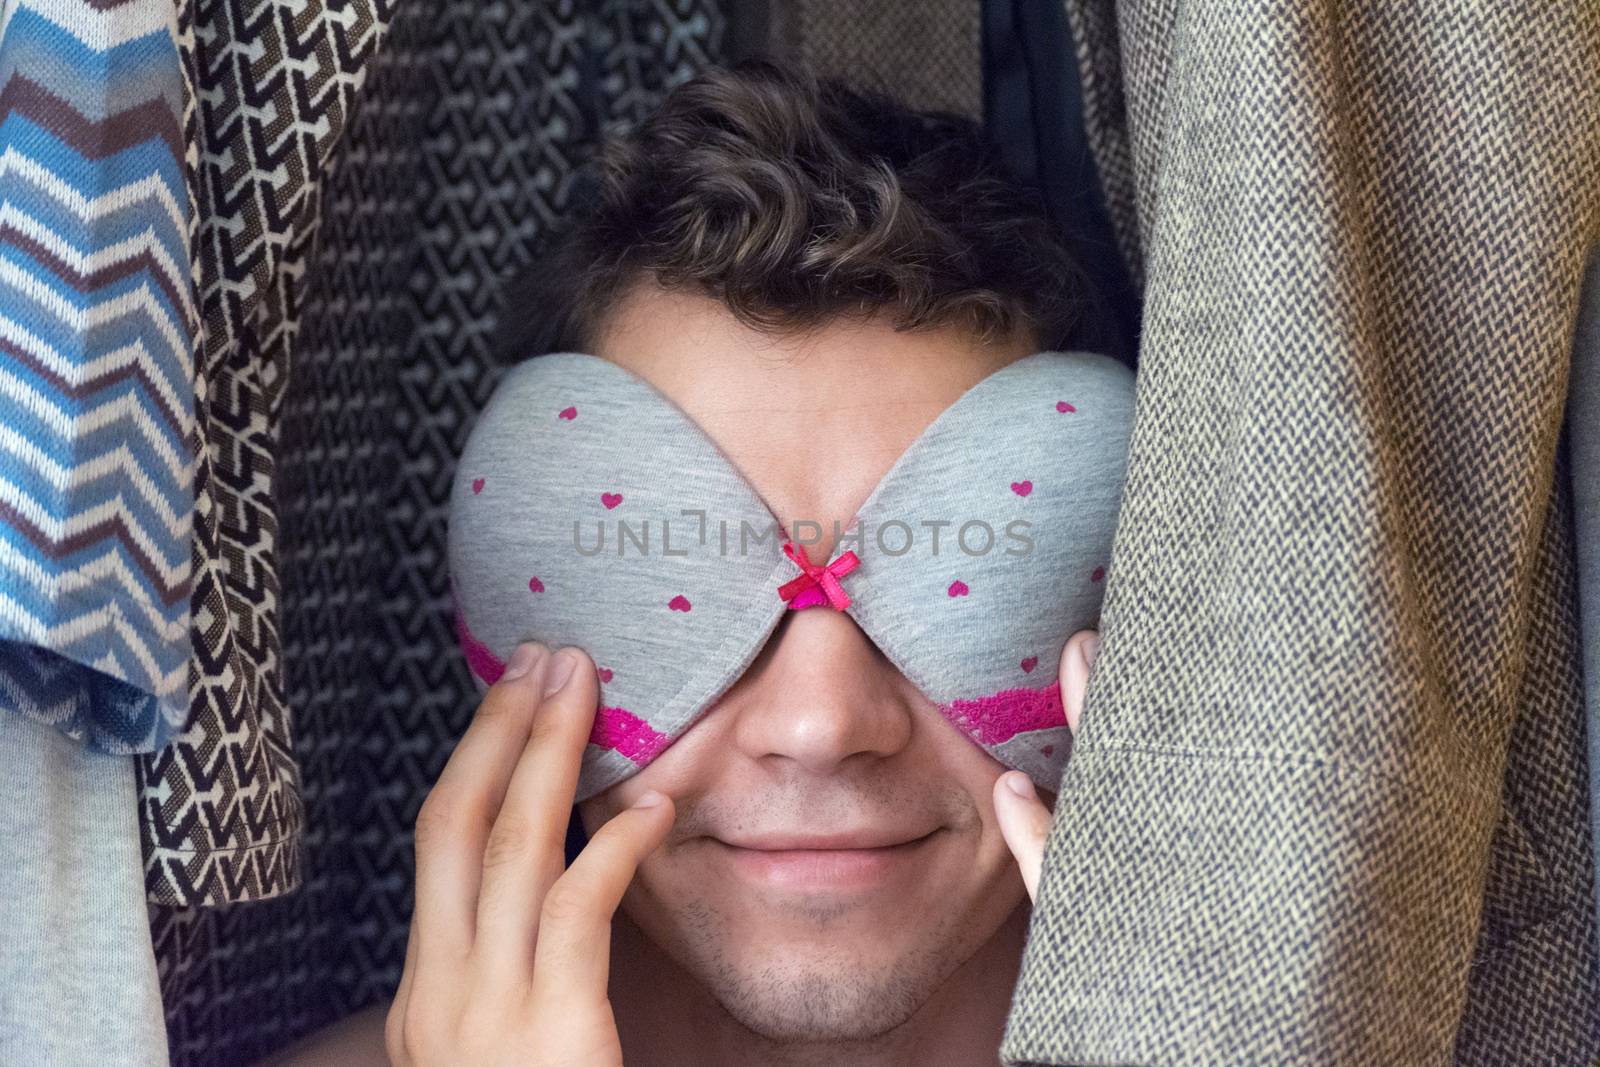 A young man in the closet with a bra on his face.